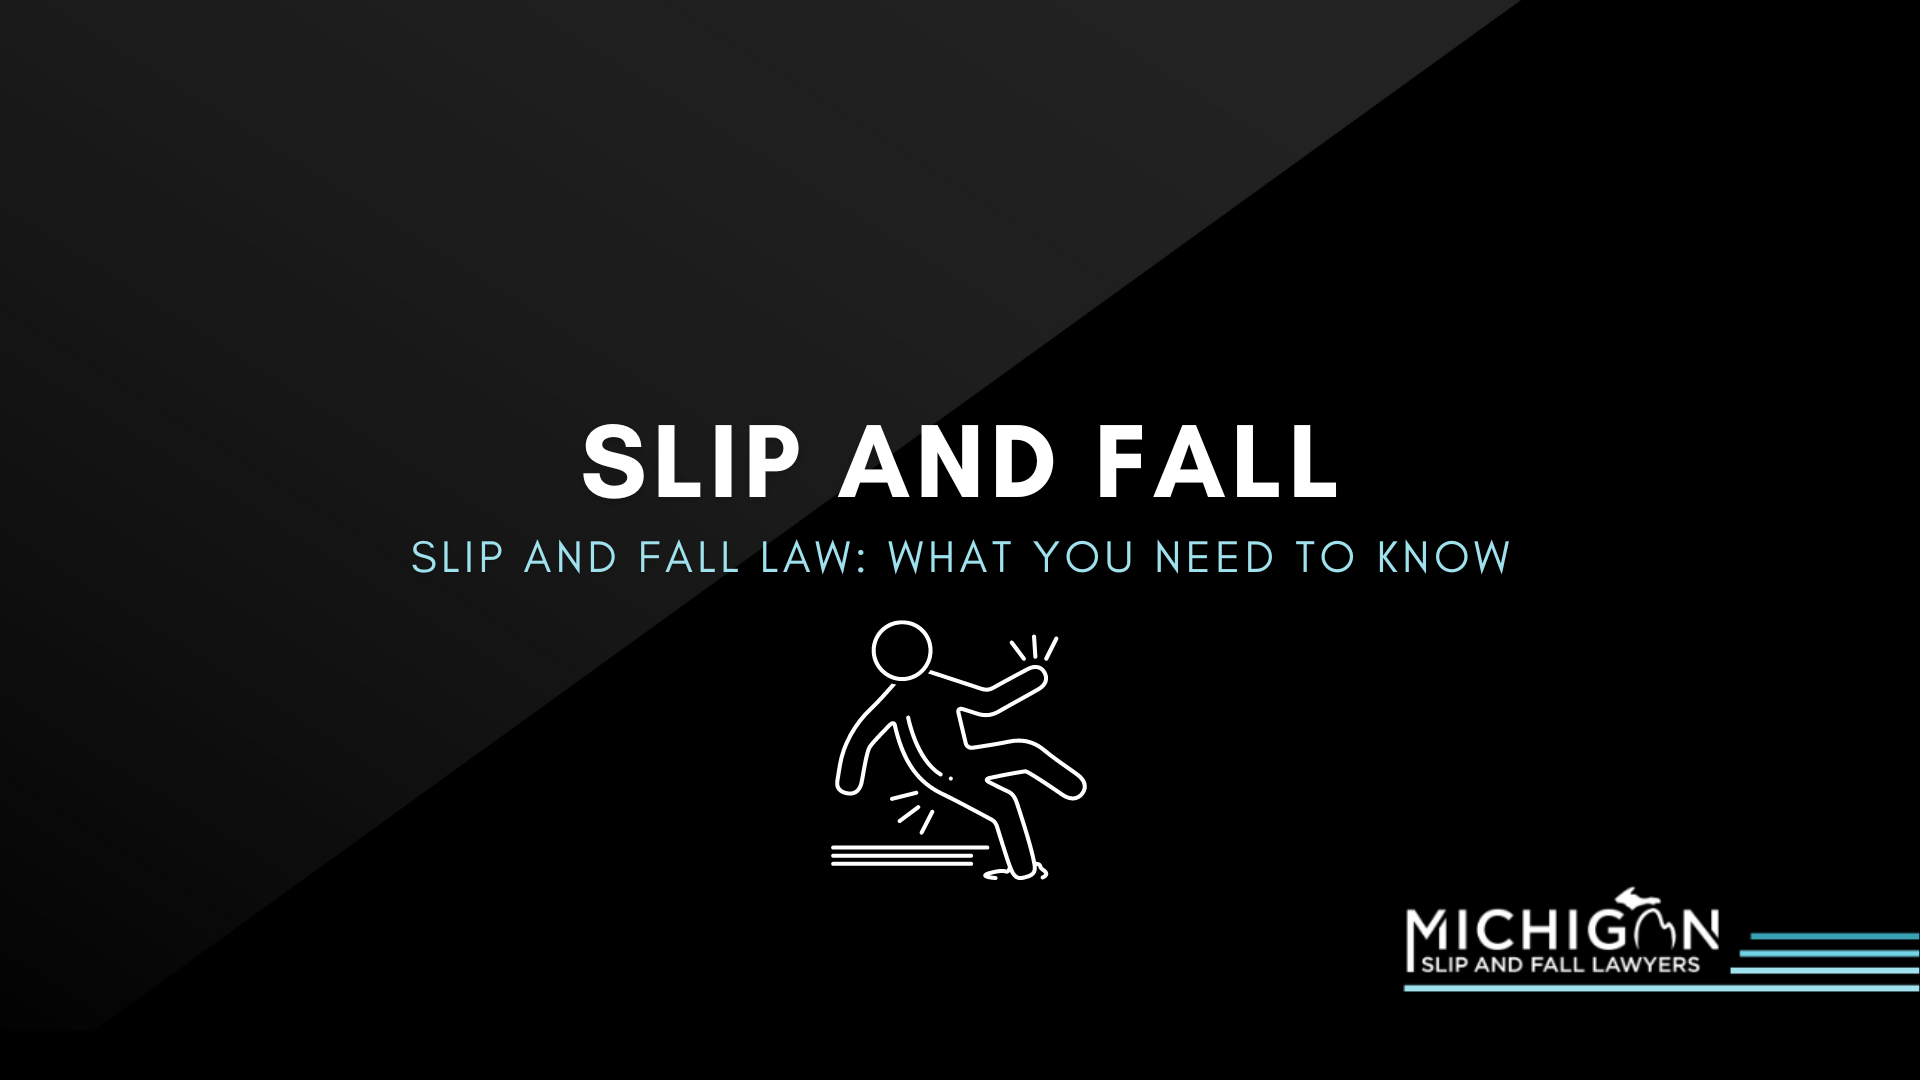 Michigan Slip and Fall Law: What You Need to Know